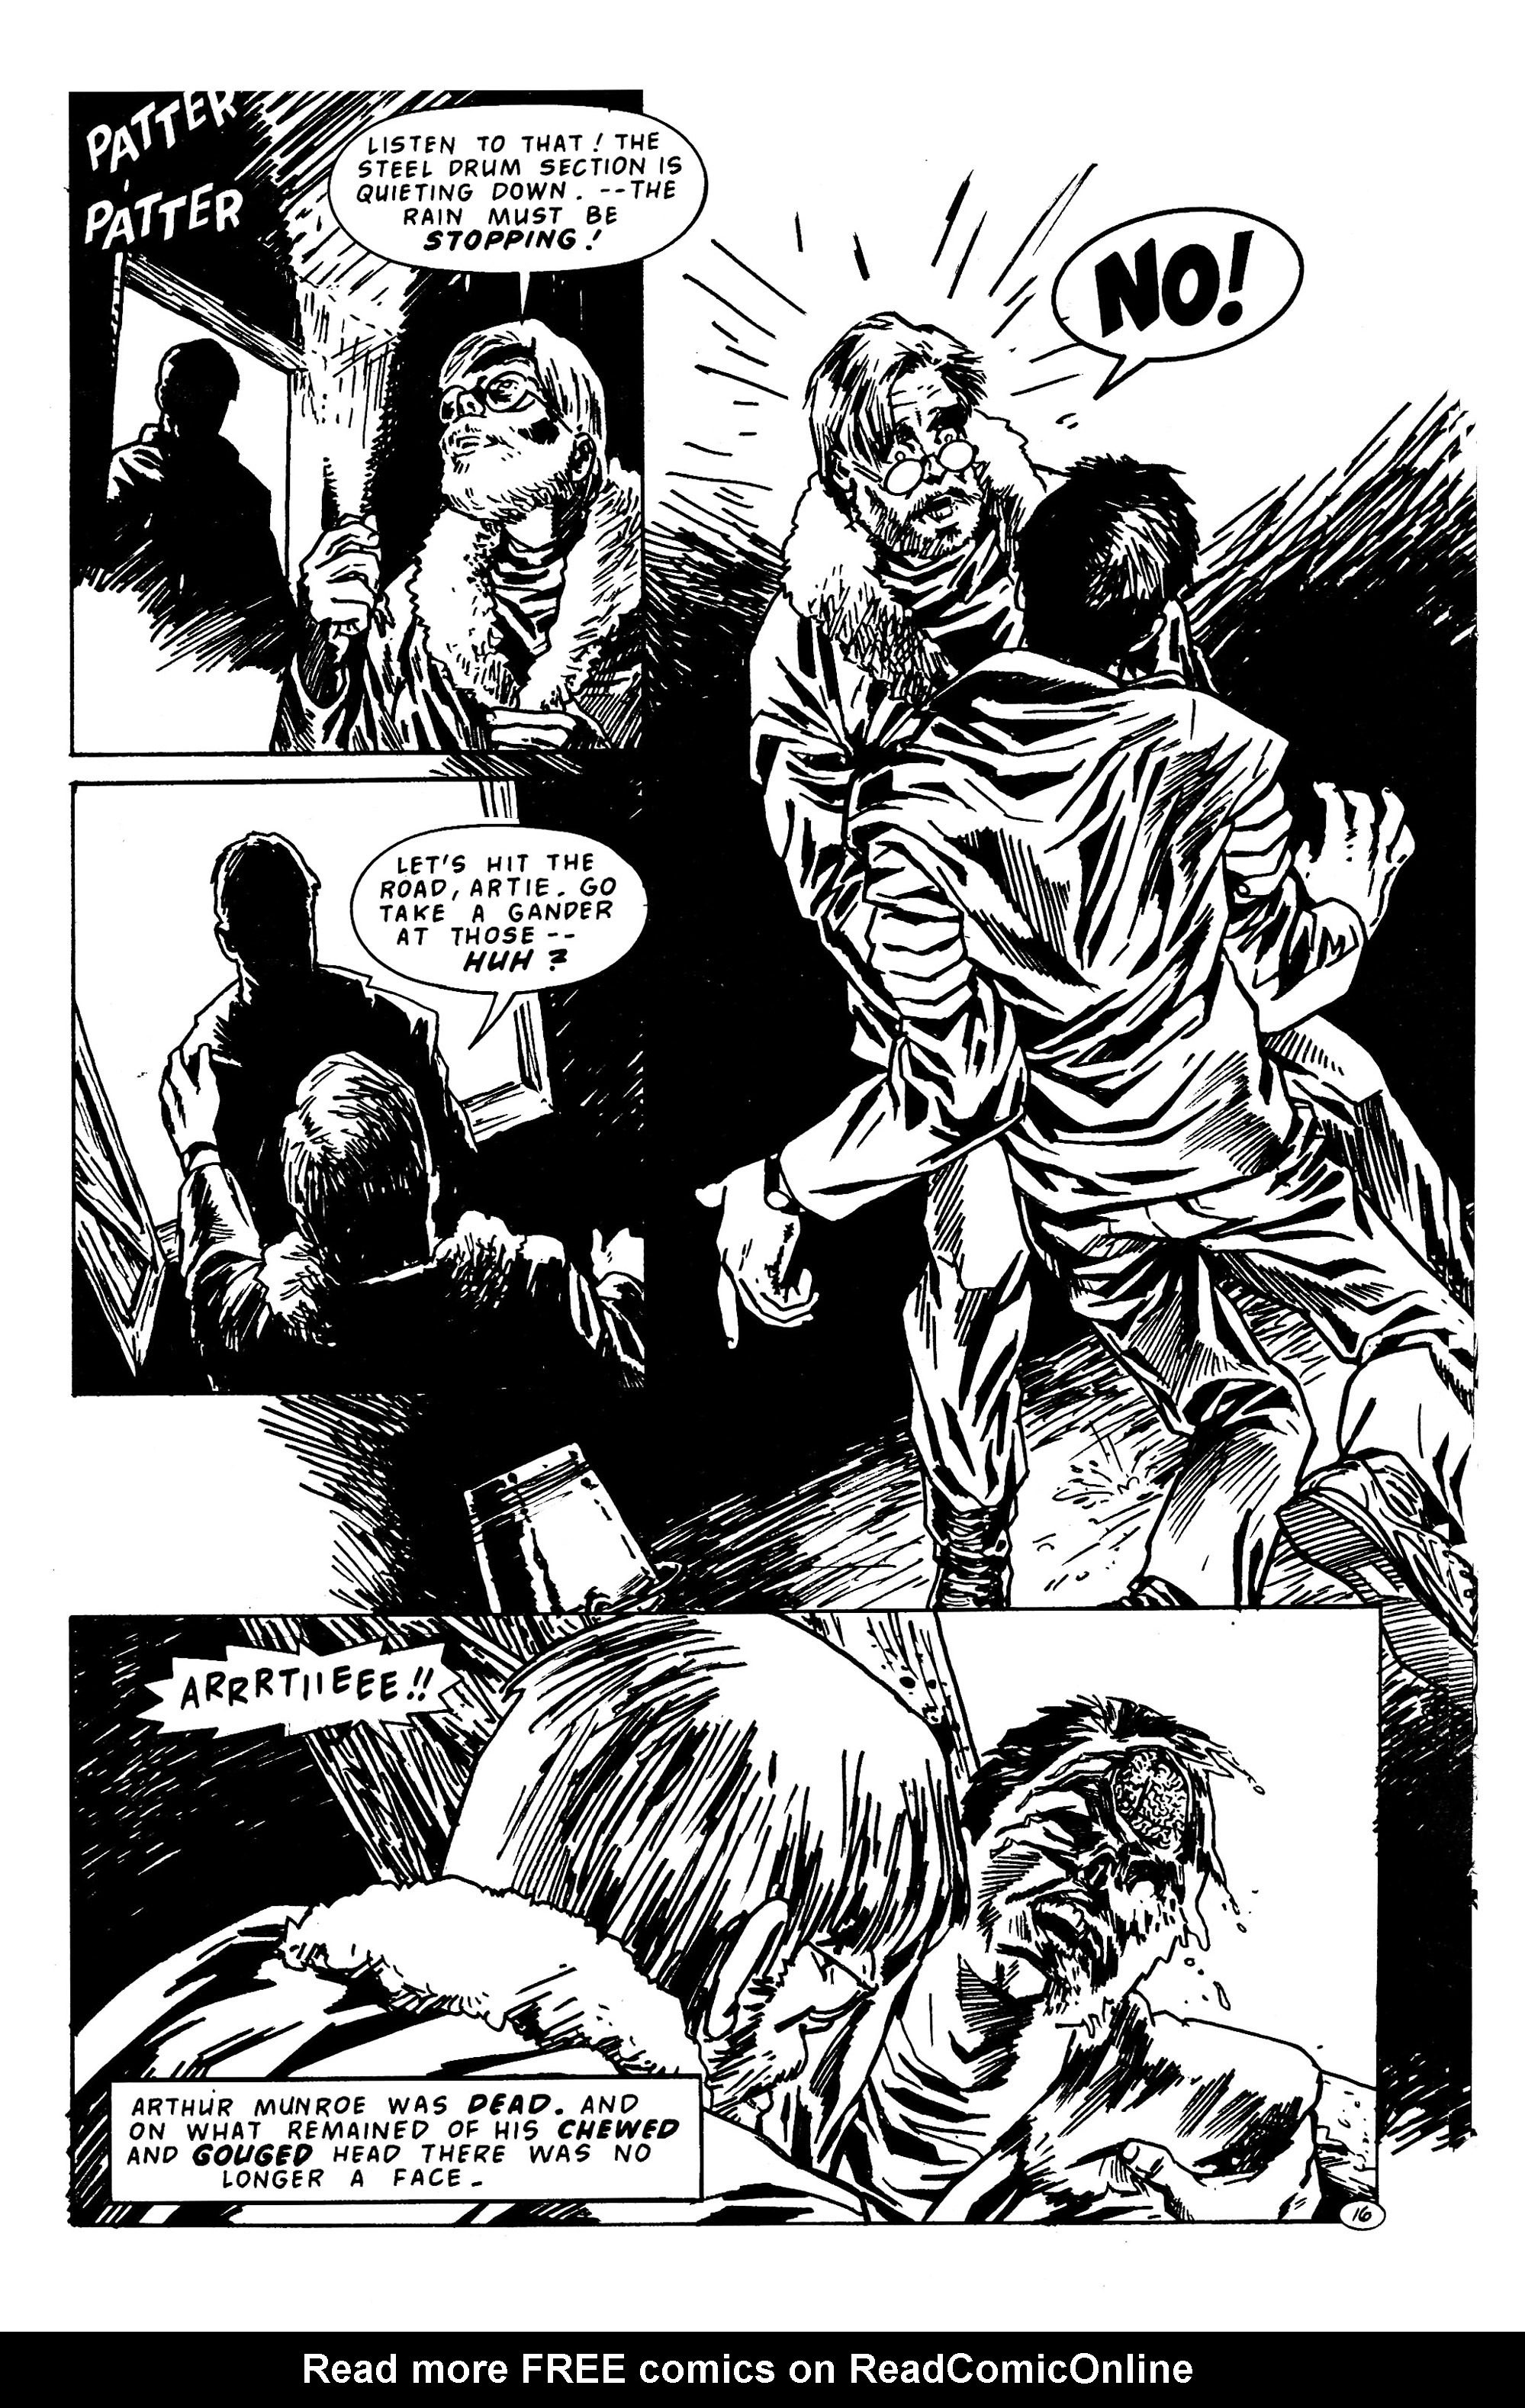 Read online Worlds of H.P. Lovecraft comic -  Issue # Issue The Lurking Fear - 18